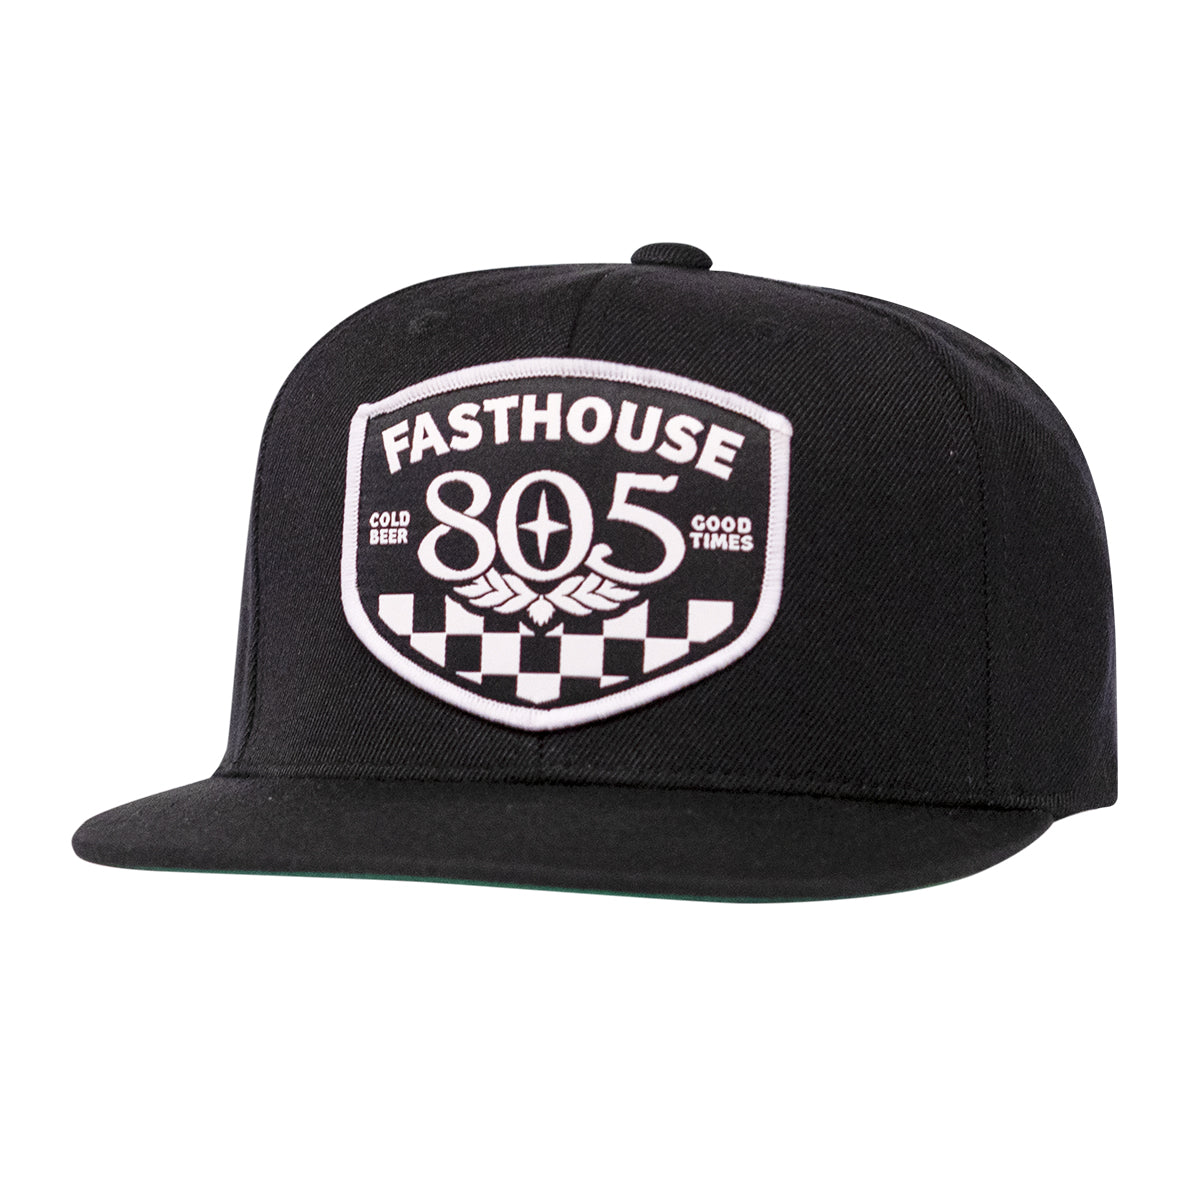 Fasthouse - 805 Pitstop Hat - Black